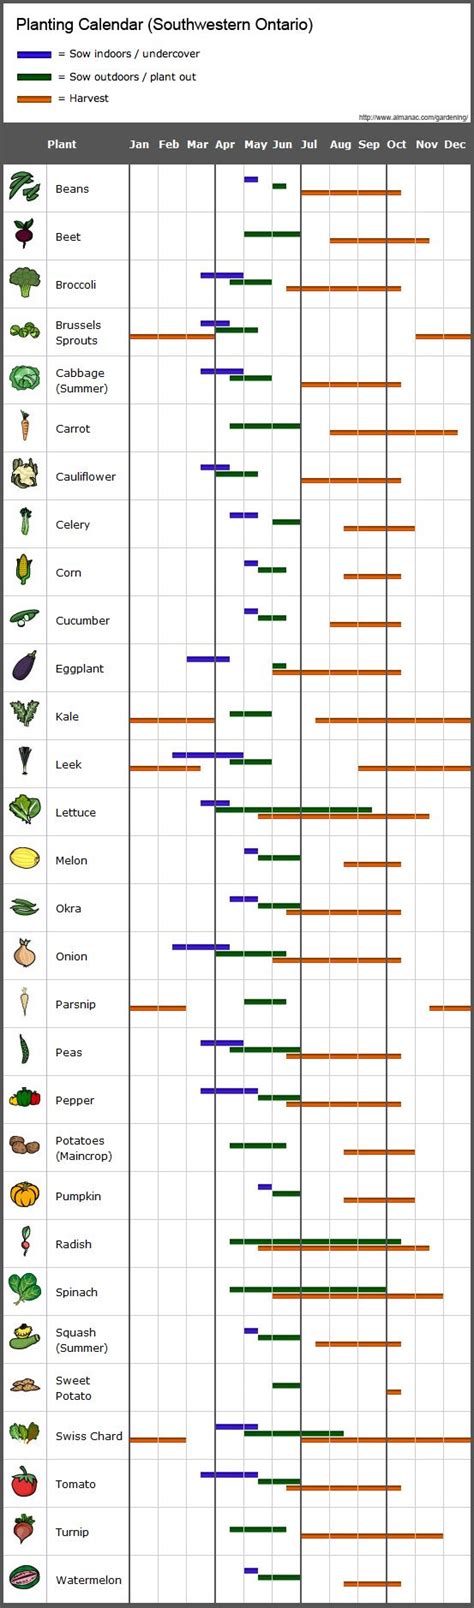 Planting Schedule for Southwestern Ontario 2015 | When to plant ...